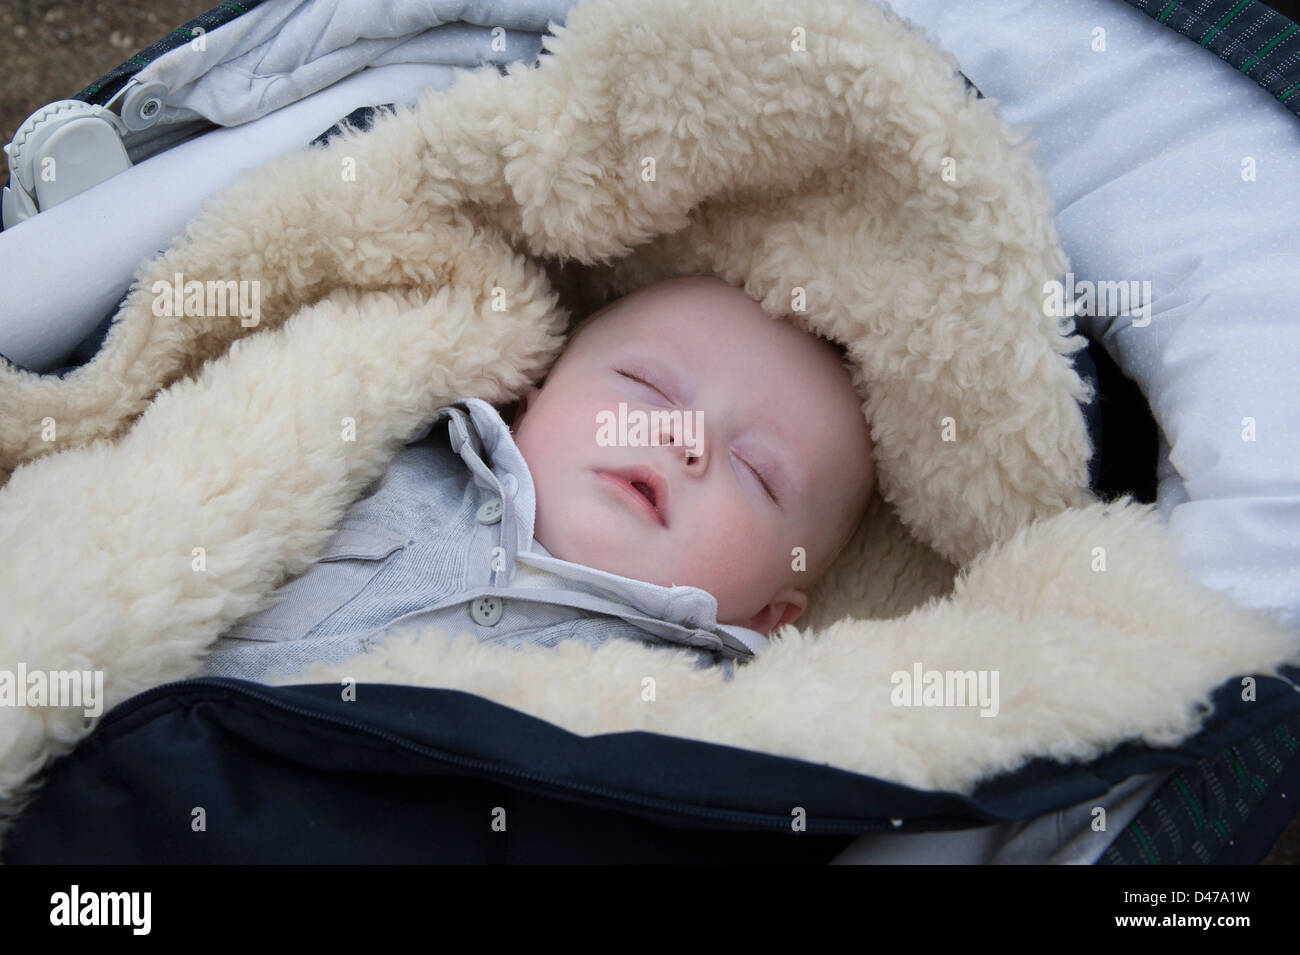 Six month old baby boy sleeping in his pram with a warm lambswool blanket Stock Photo